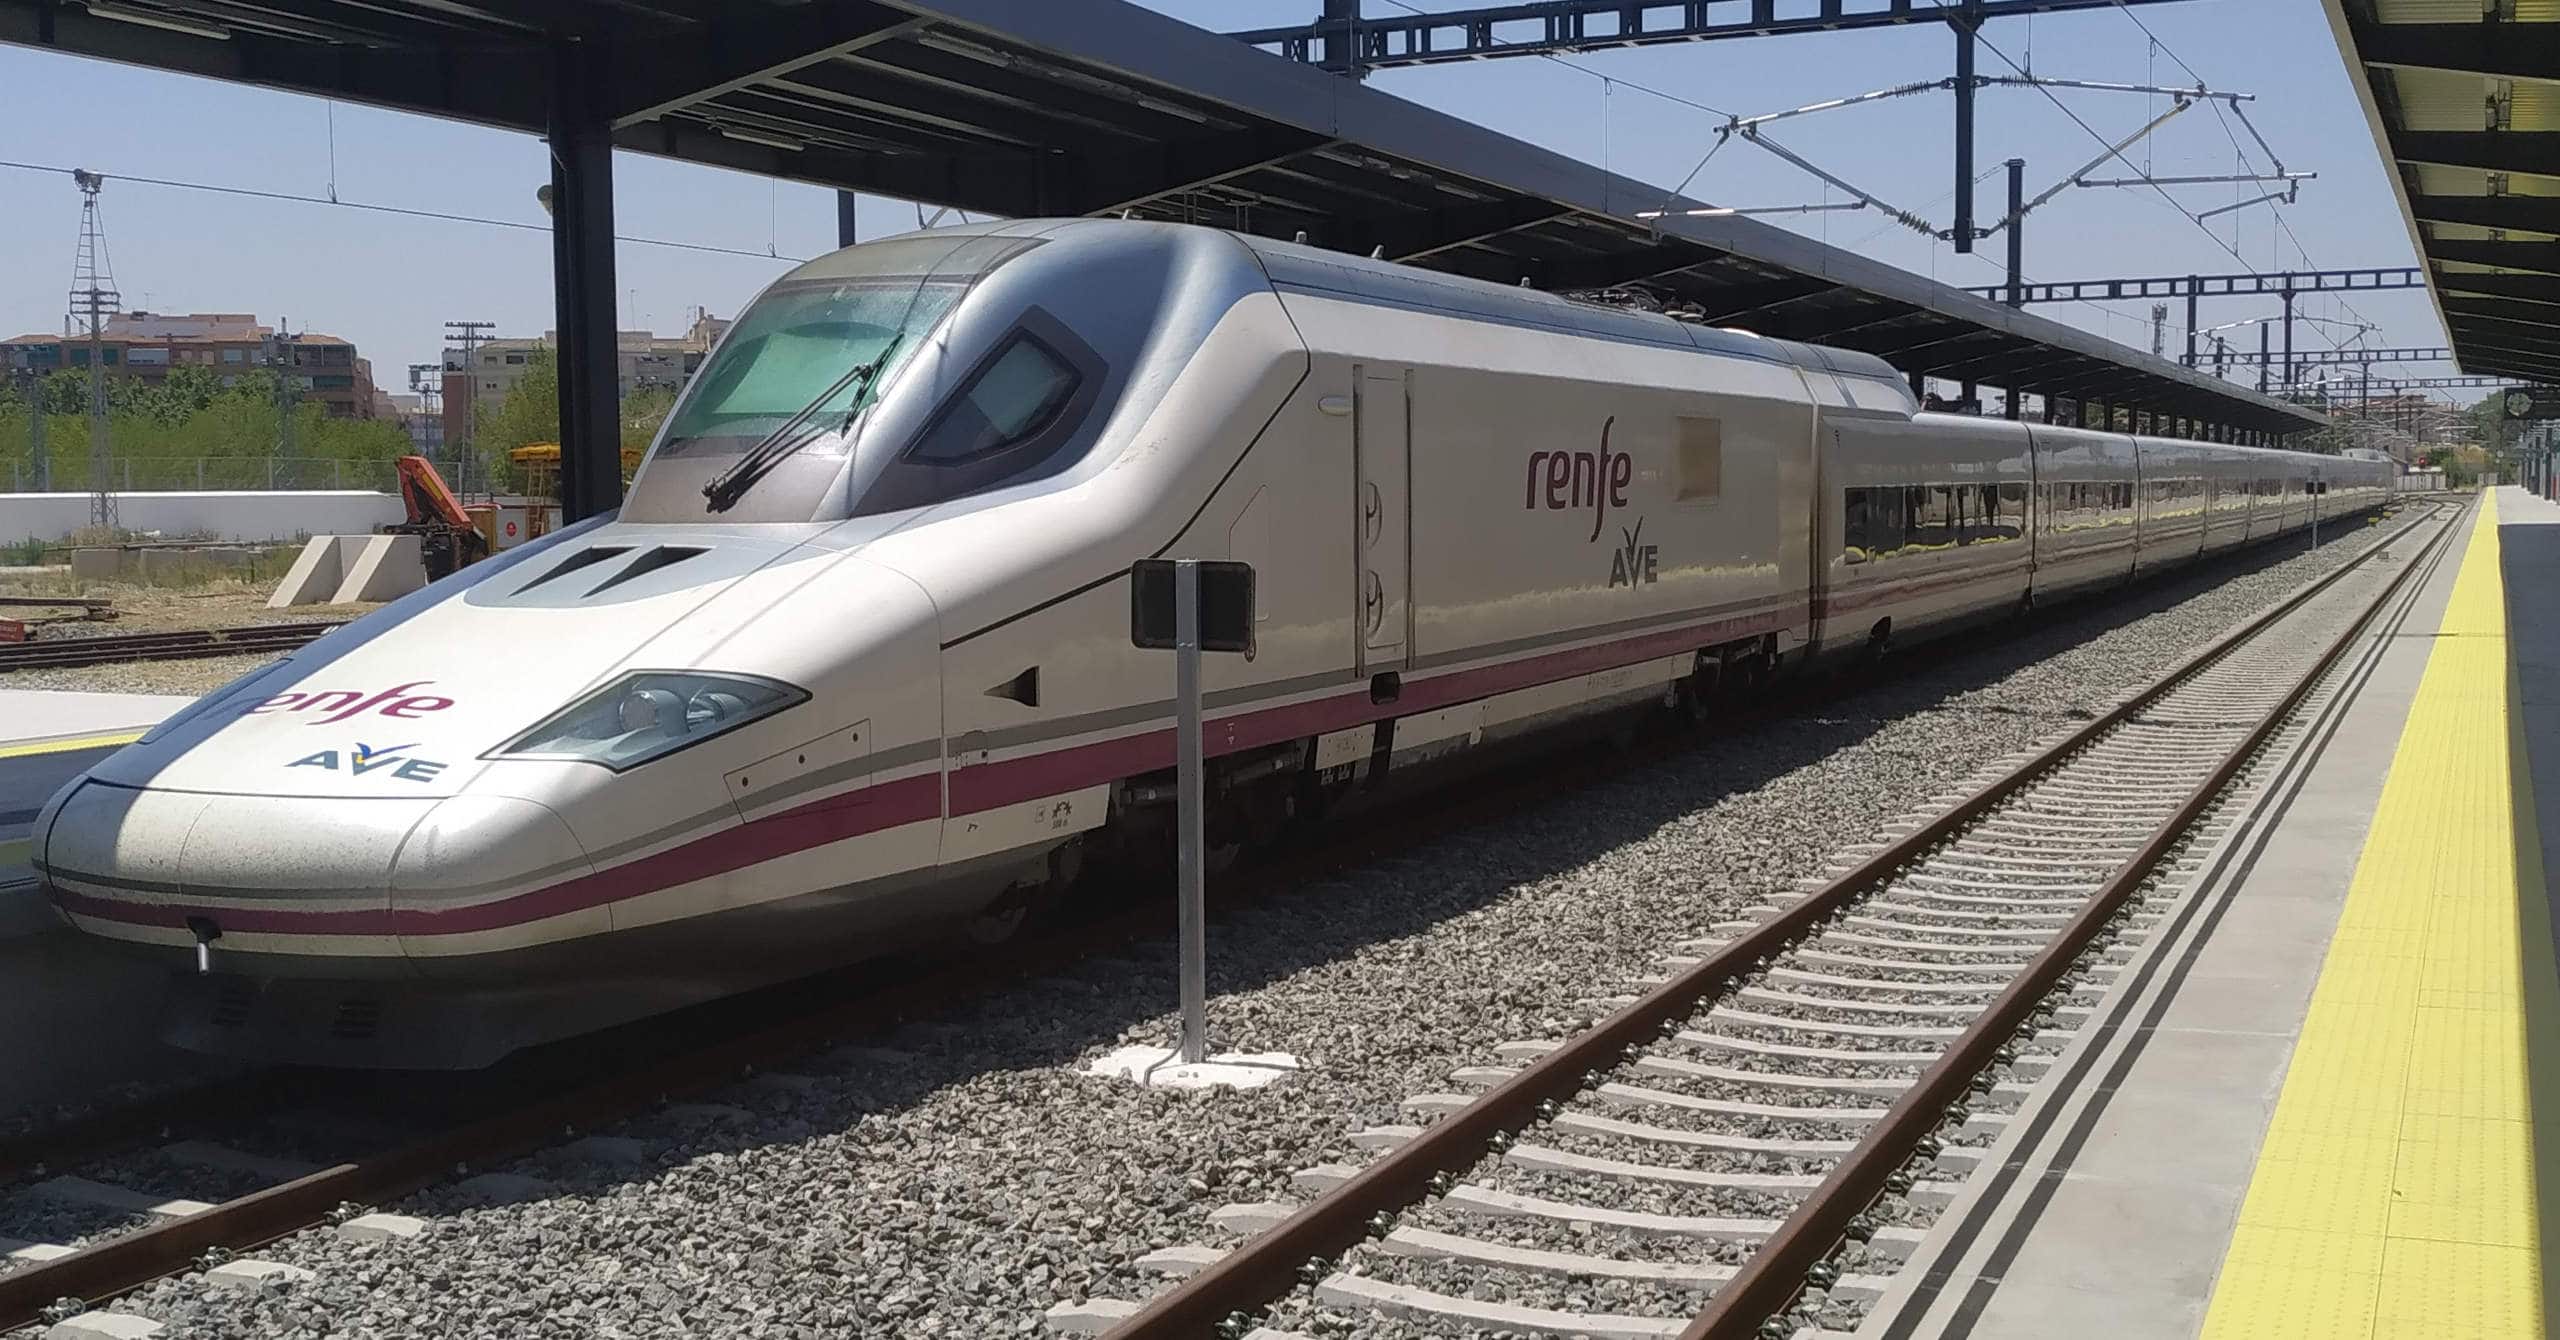 Stag-do party fined after drunken antics on high speed Madrid-Malaga train service in Spain